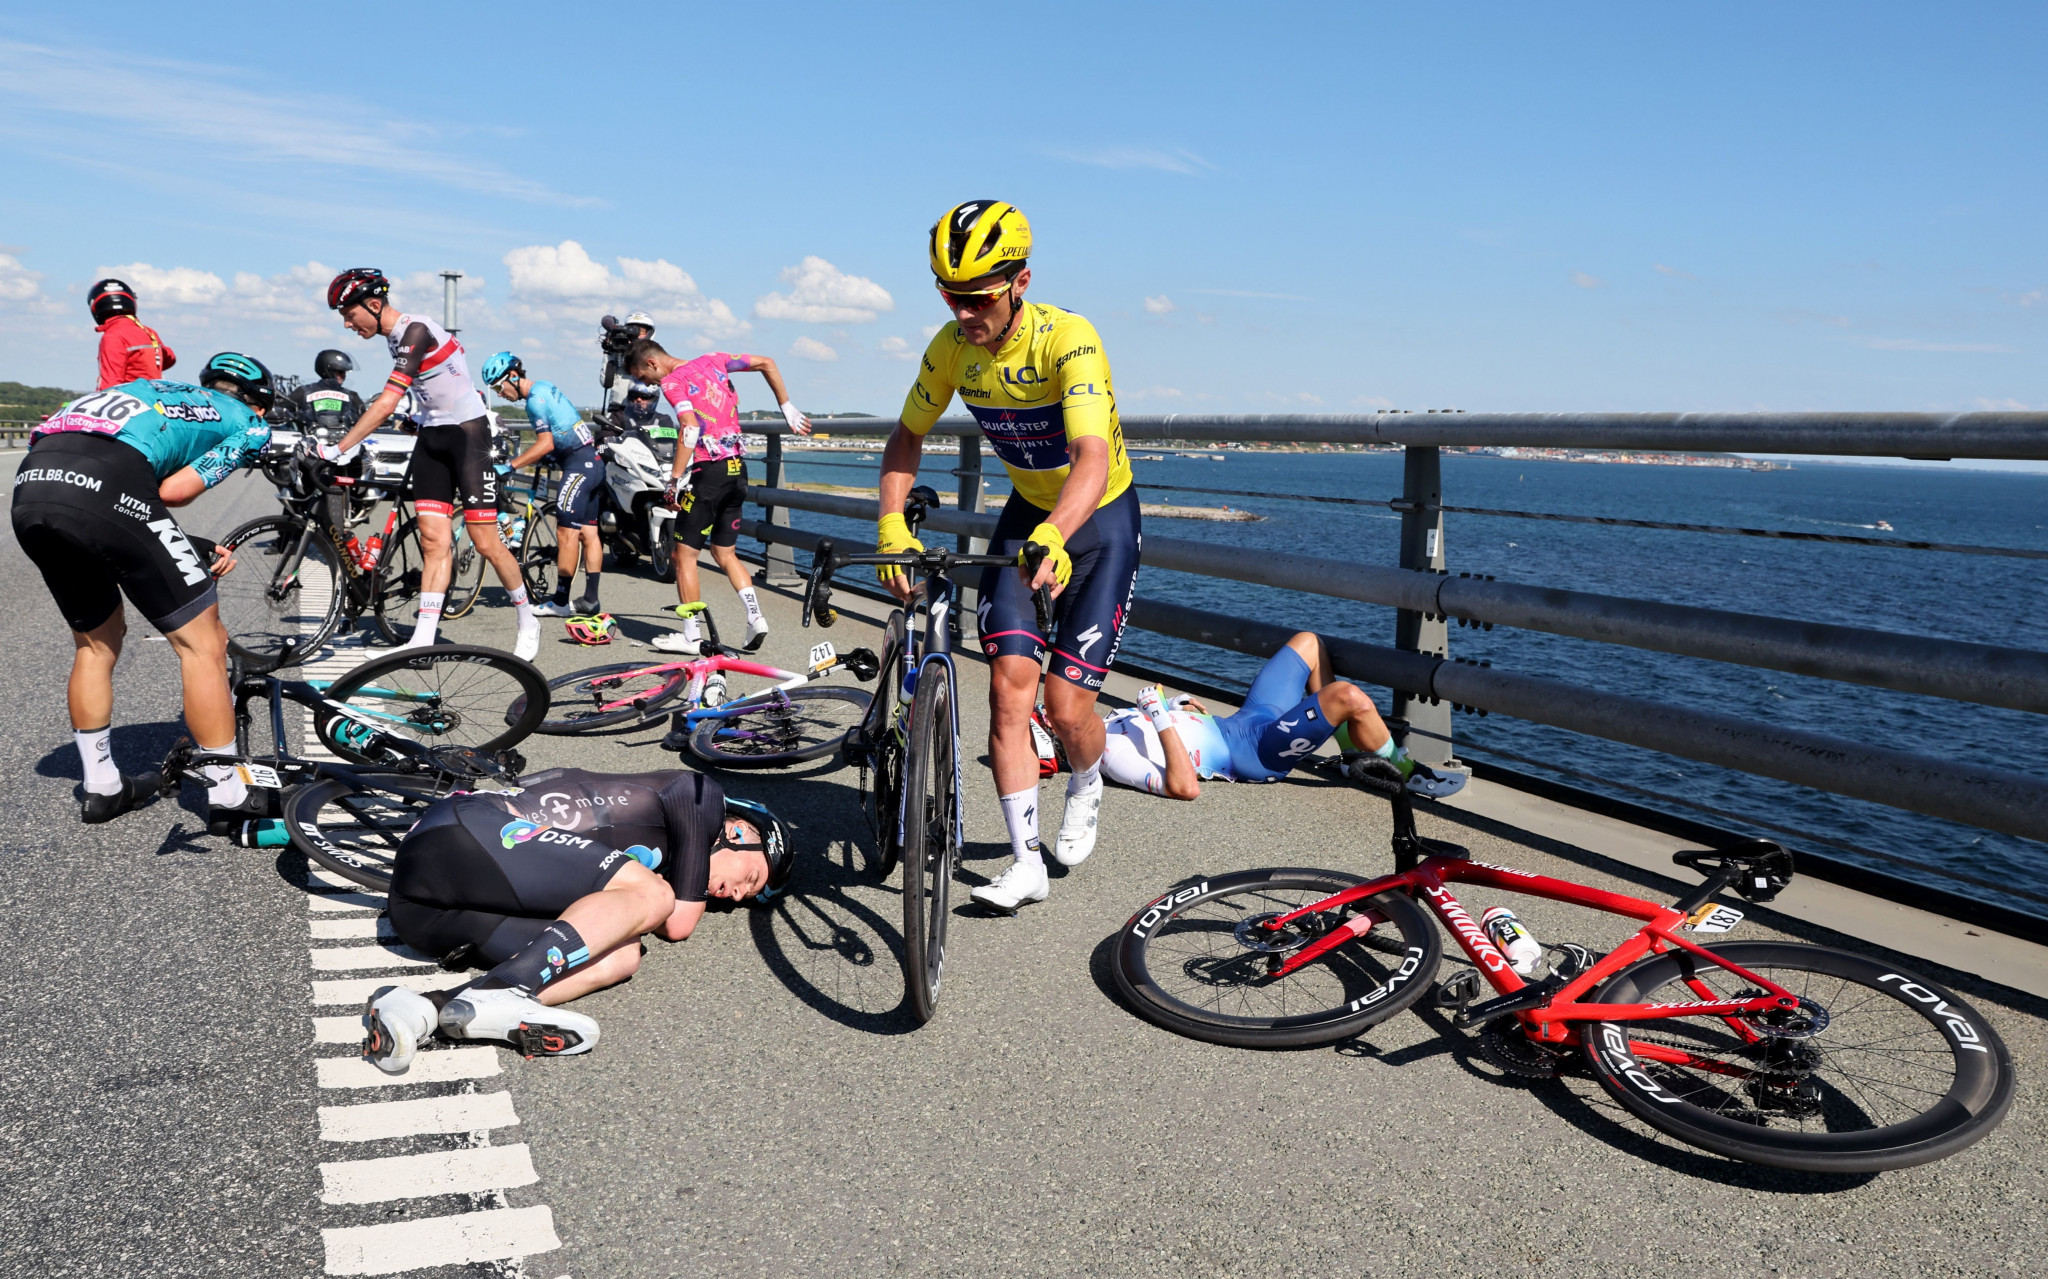 Yves Lampaert was among several riders to go down in a huge crash on the Great Belt Bridge ©Getty Images